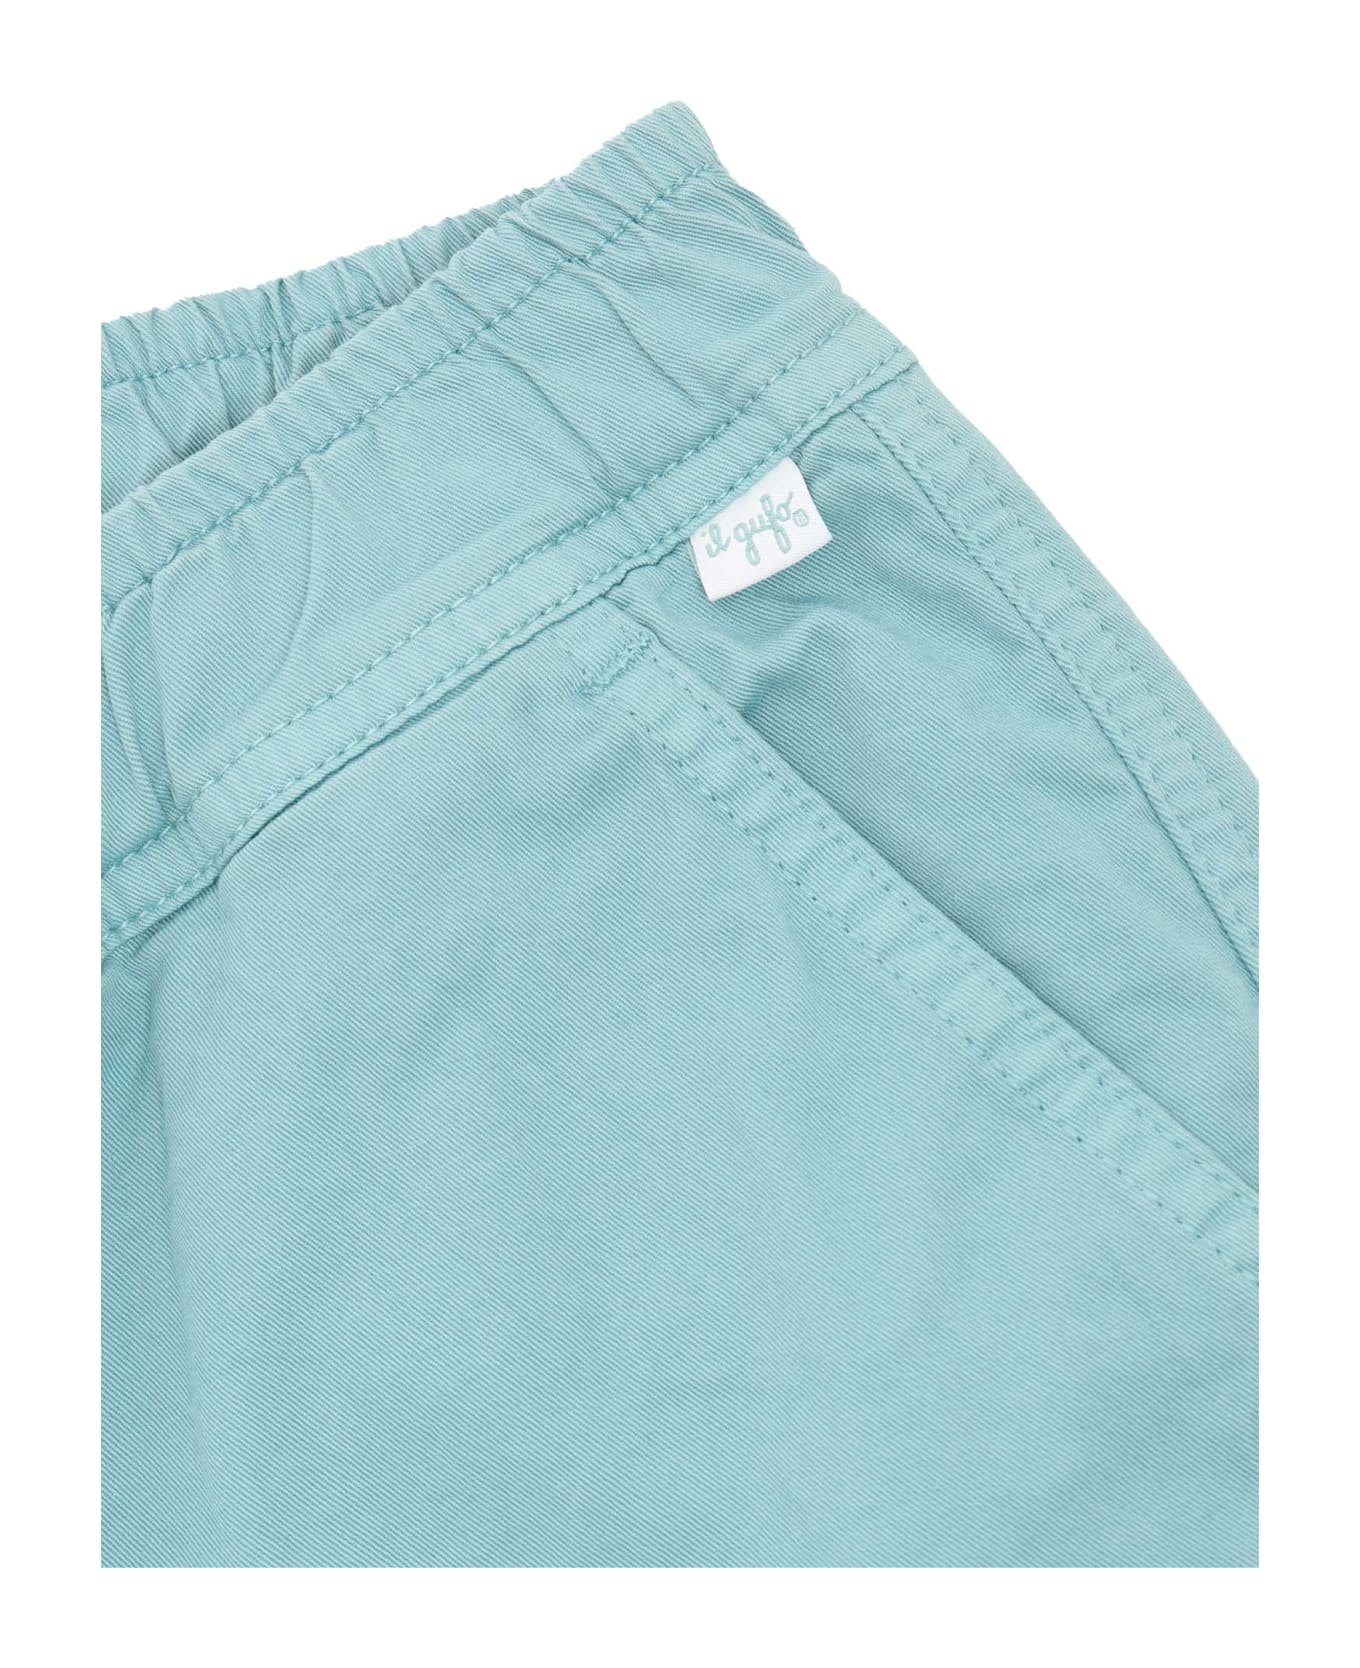 Il Gufo Light Blue Trousers - GREEN ボトムス